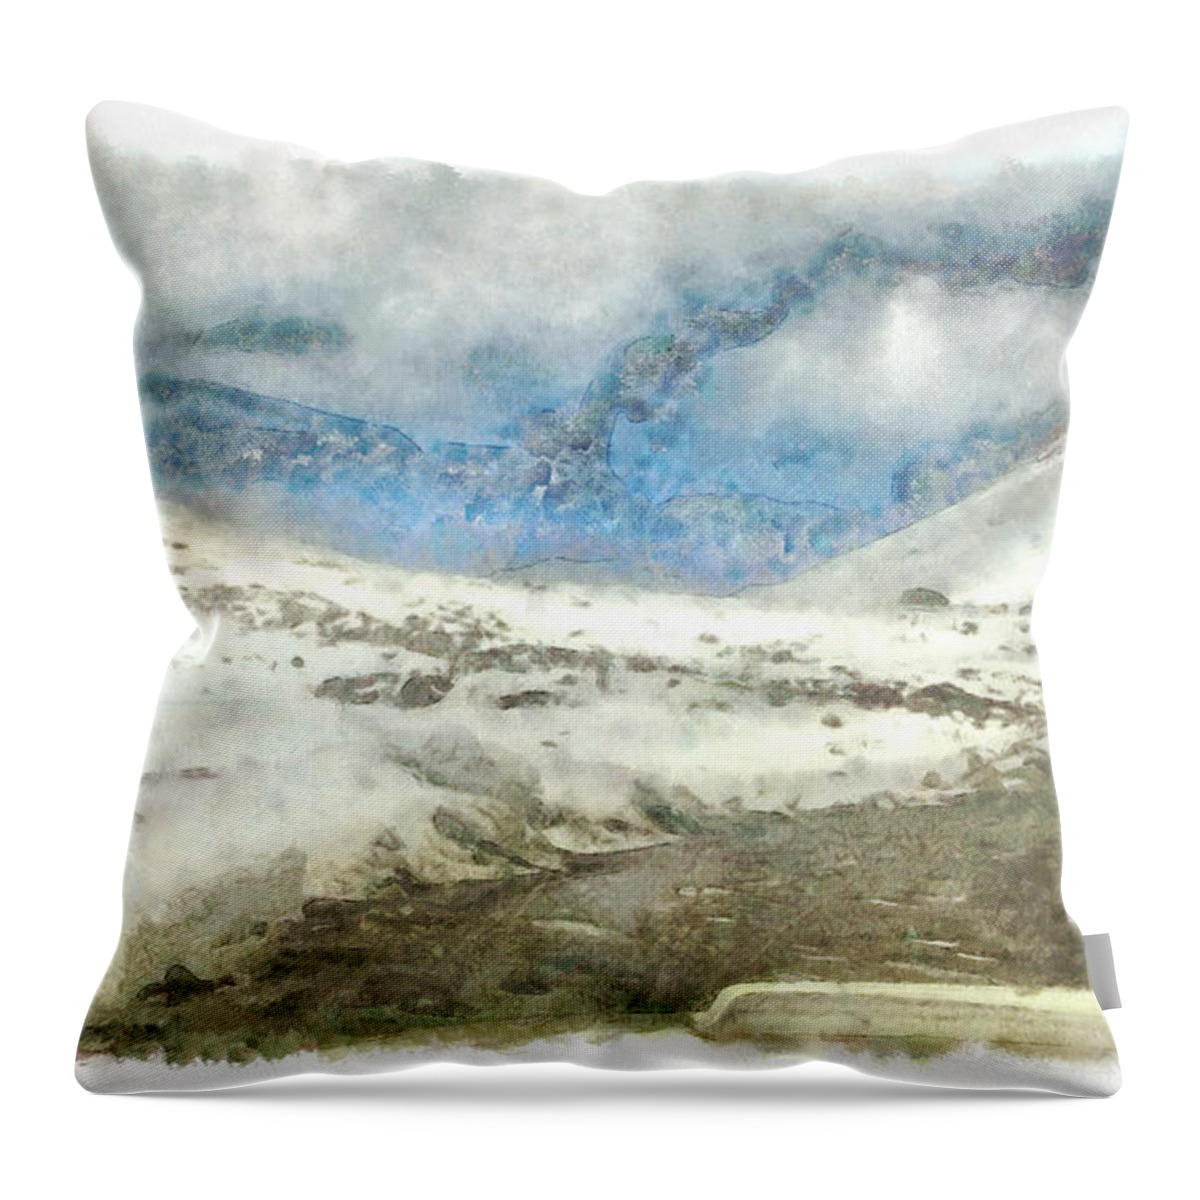 Snow Throw Pillow featuring the photograph Snow and ice melting to form water by Ashish Agarwal